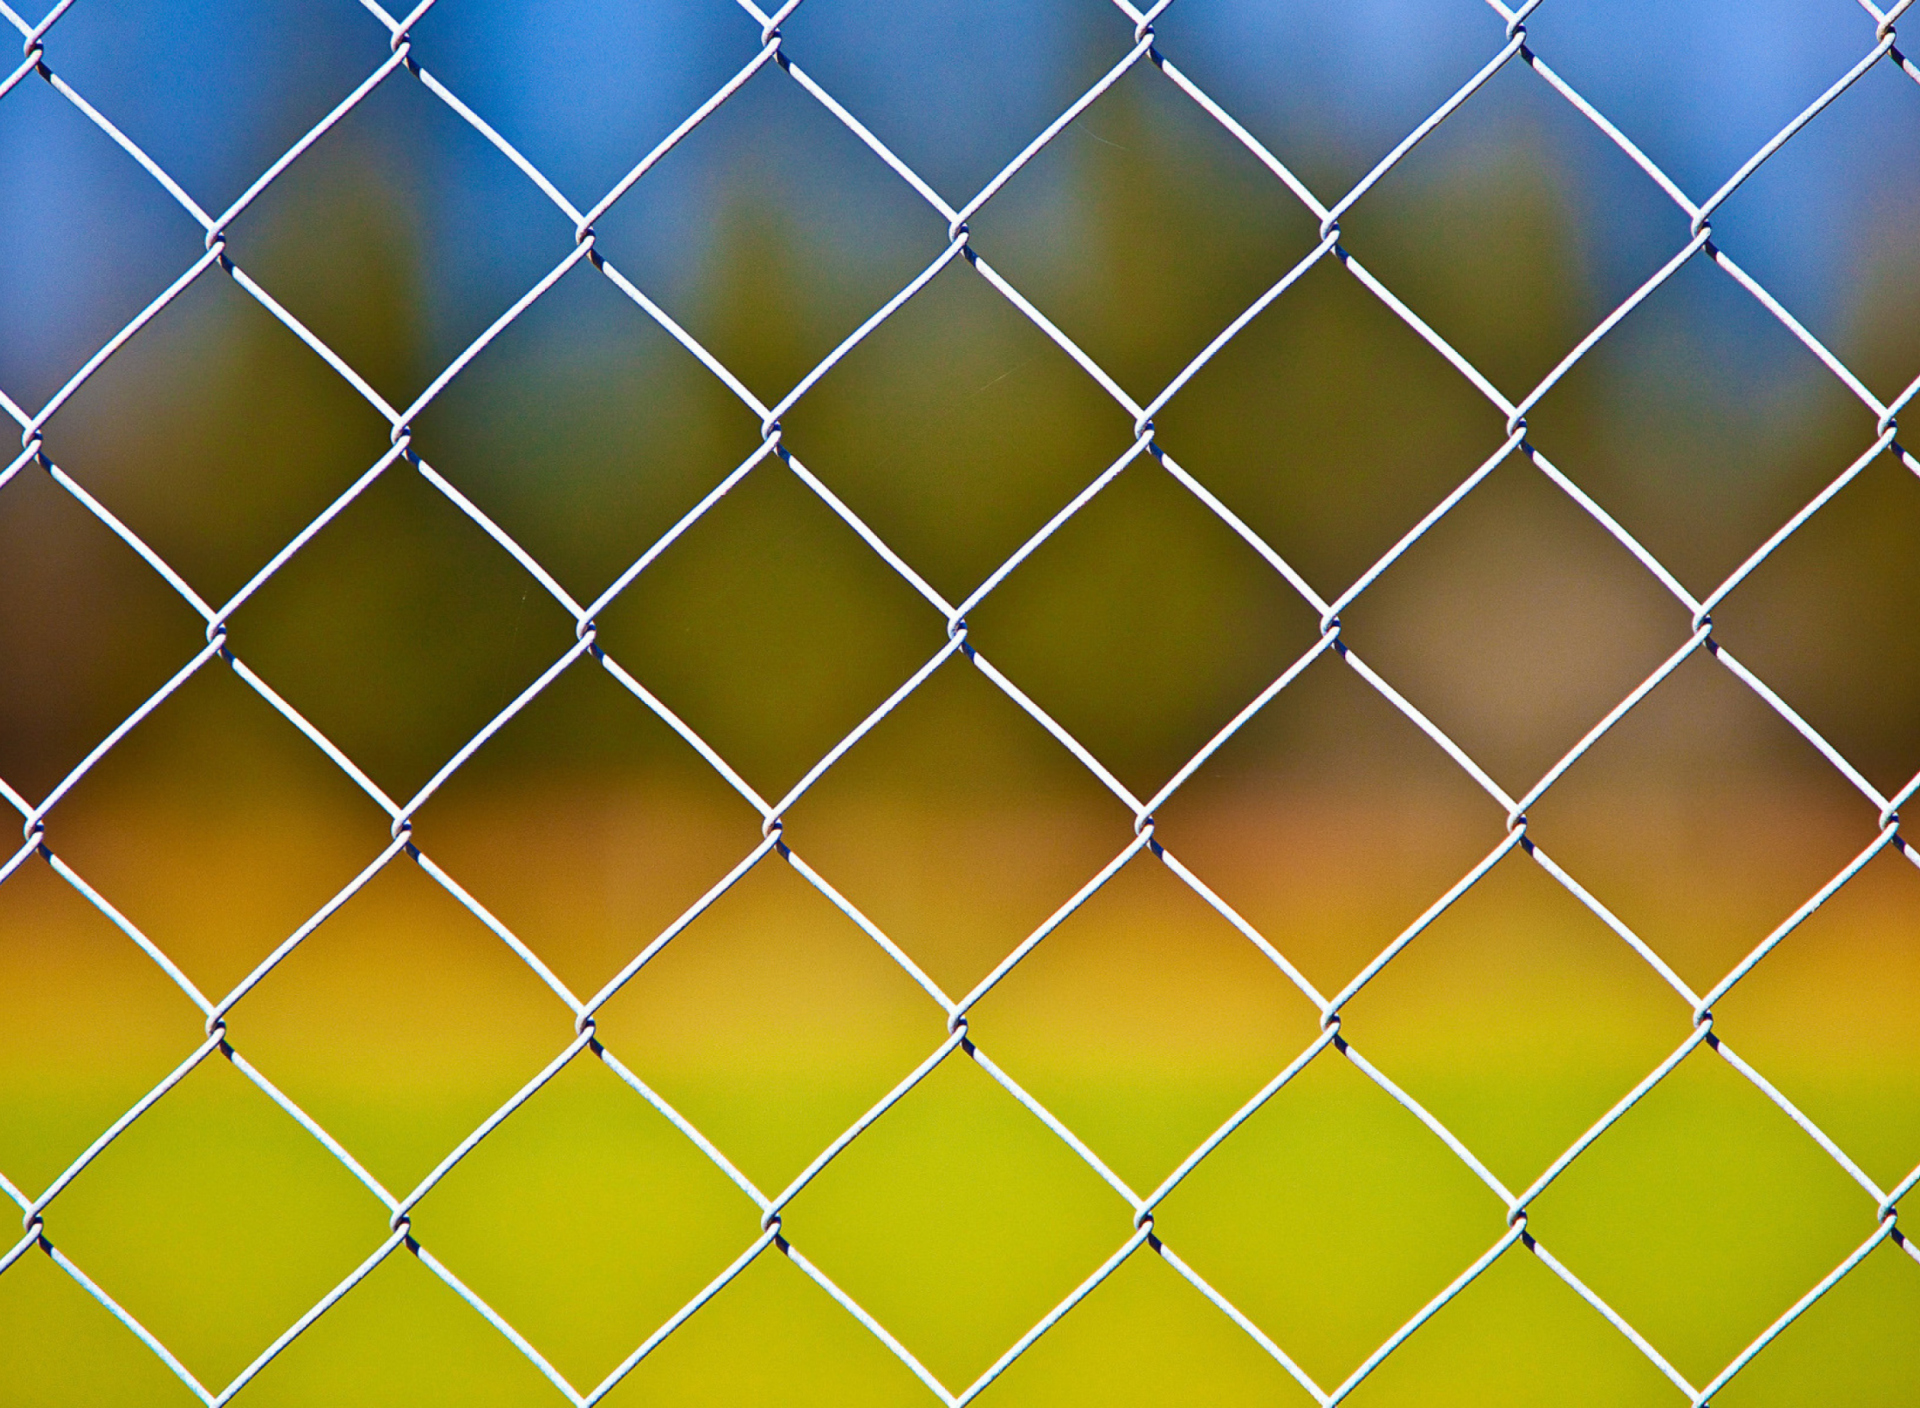 Cage Fence wallpaper 1920x1408